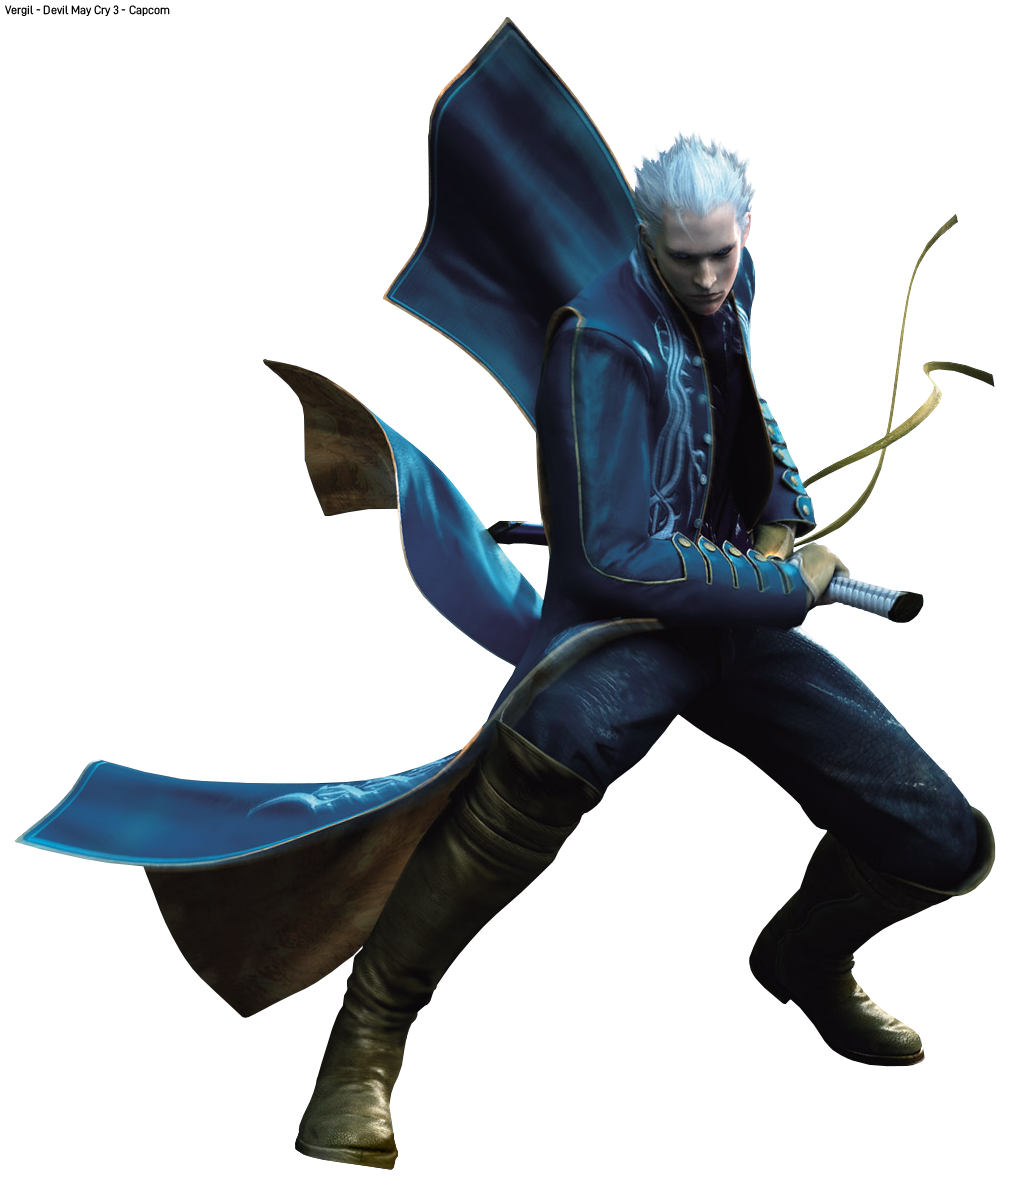 Devil May Cry 3 Vergil Promo Art Render PNG by Phisign on DeviantArt